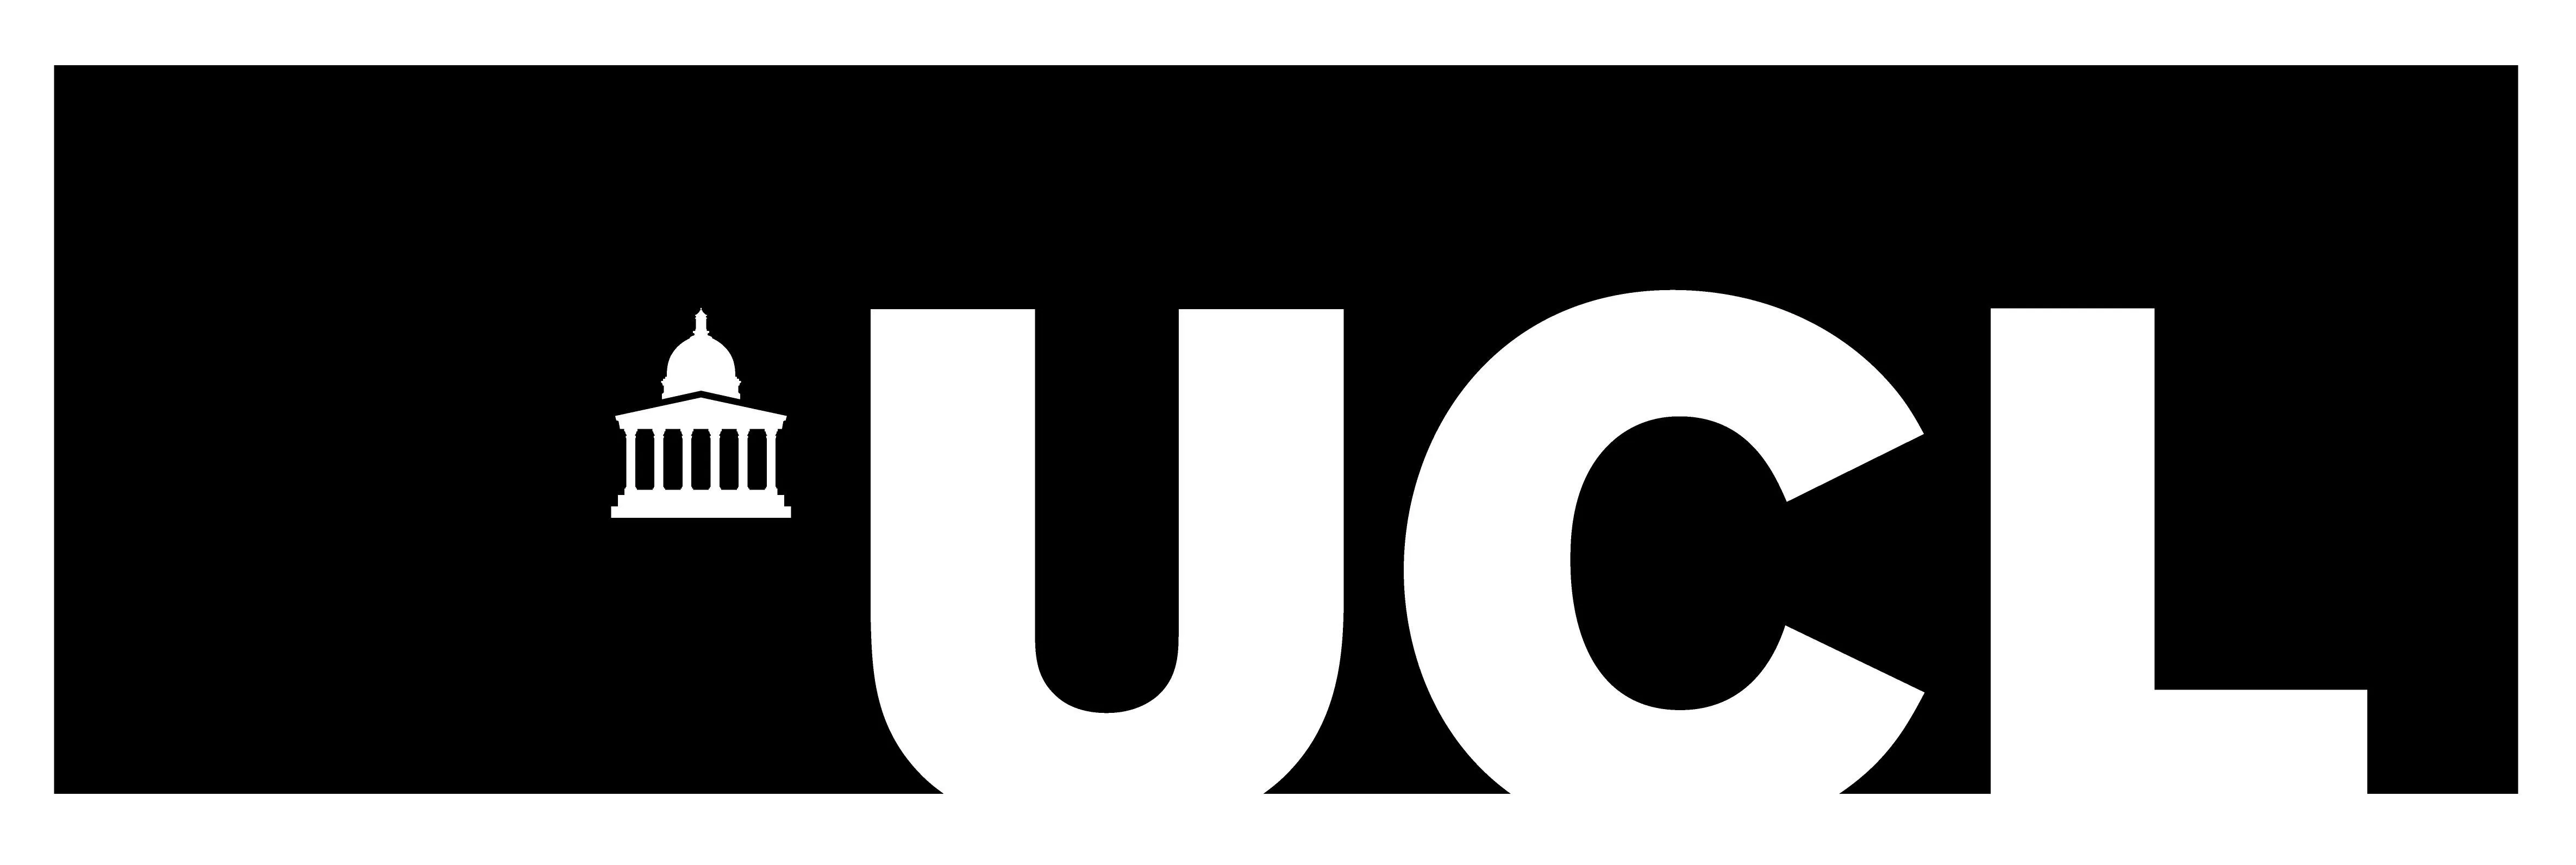 University College London logo in black and white 